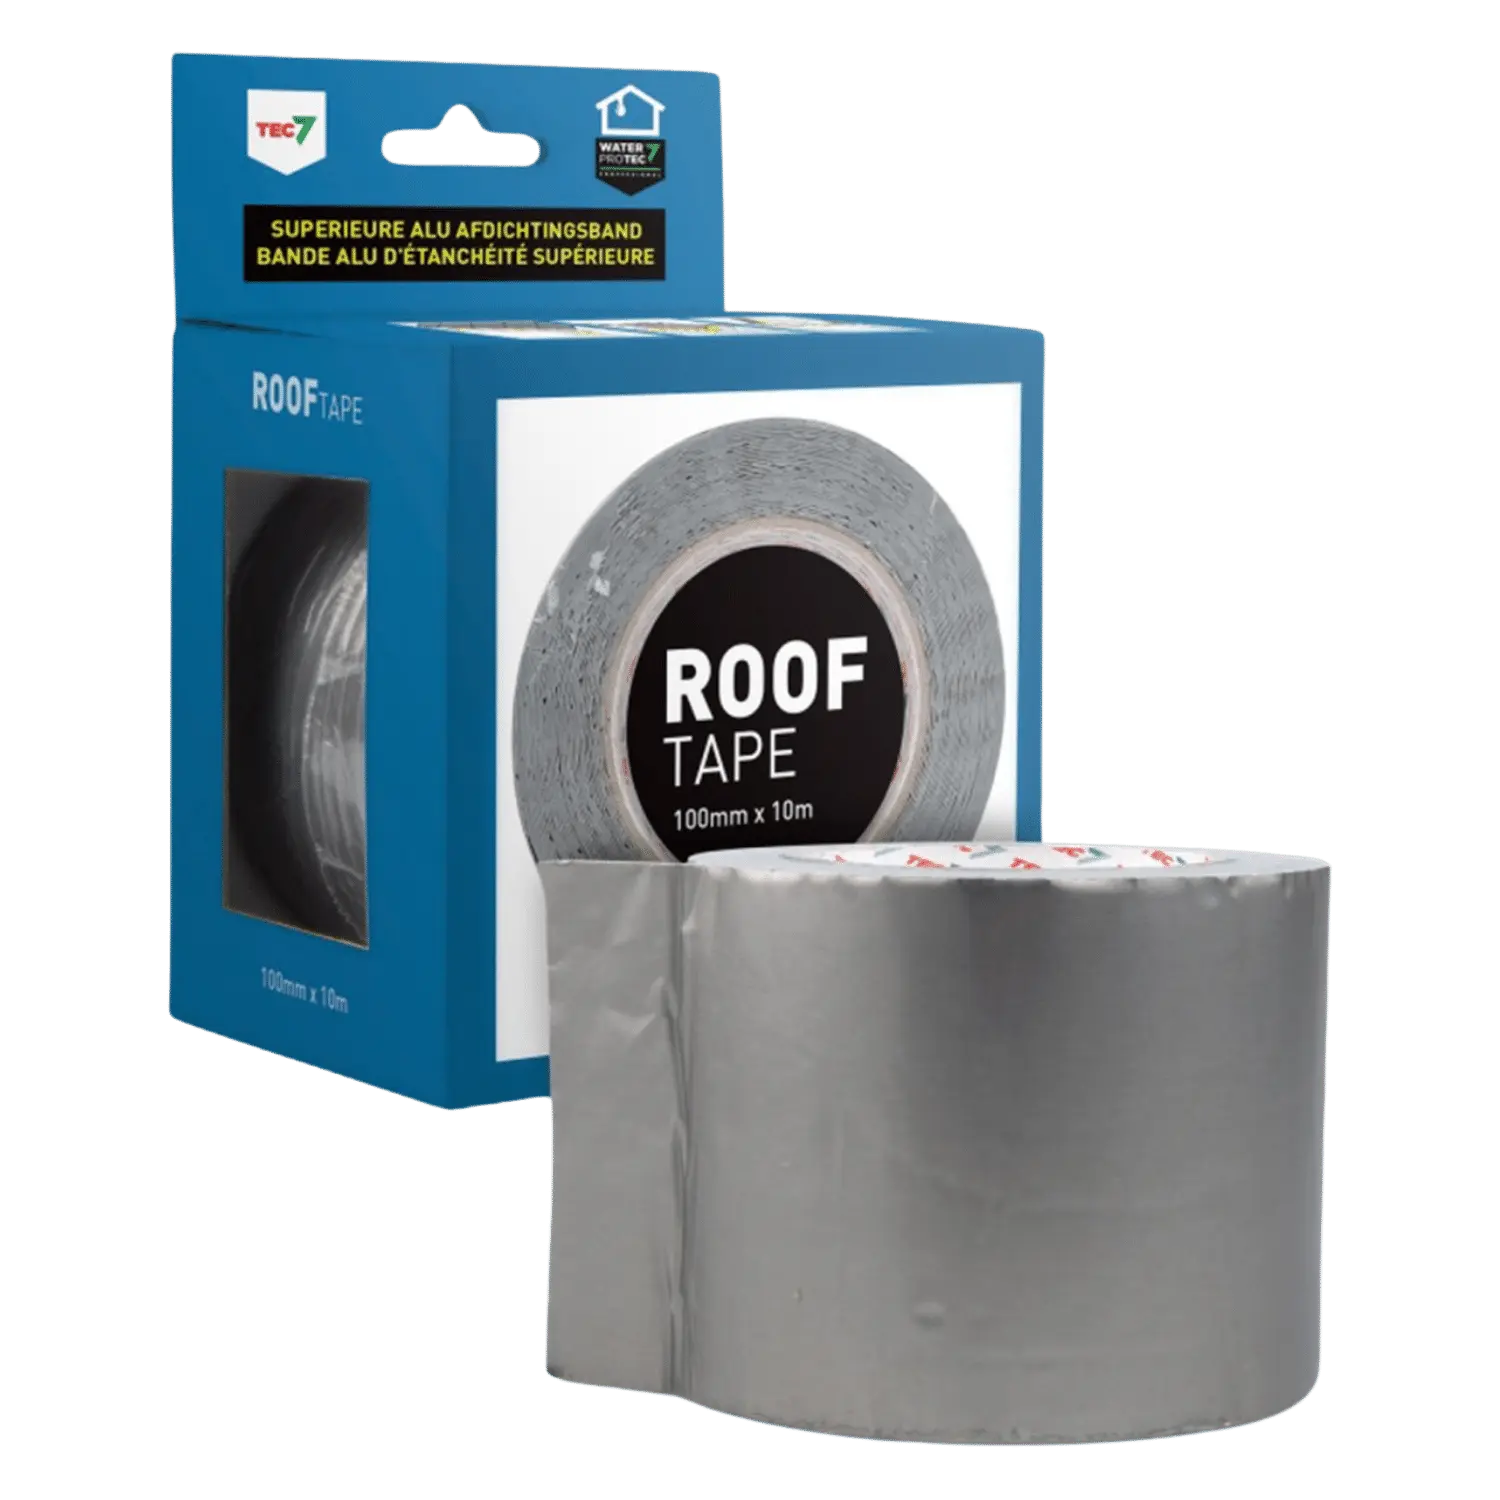 WP7-202 Roof tape 100mmx10m